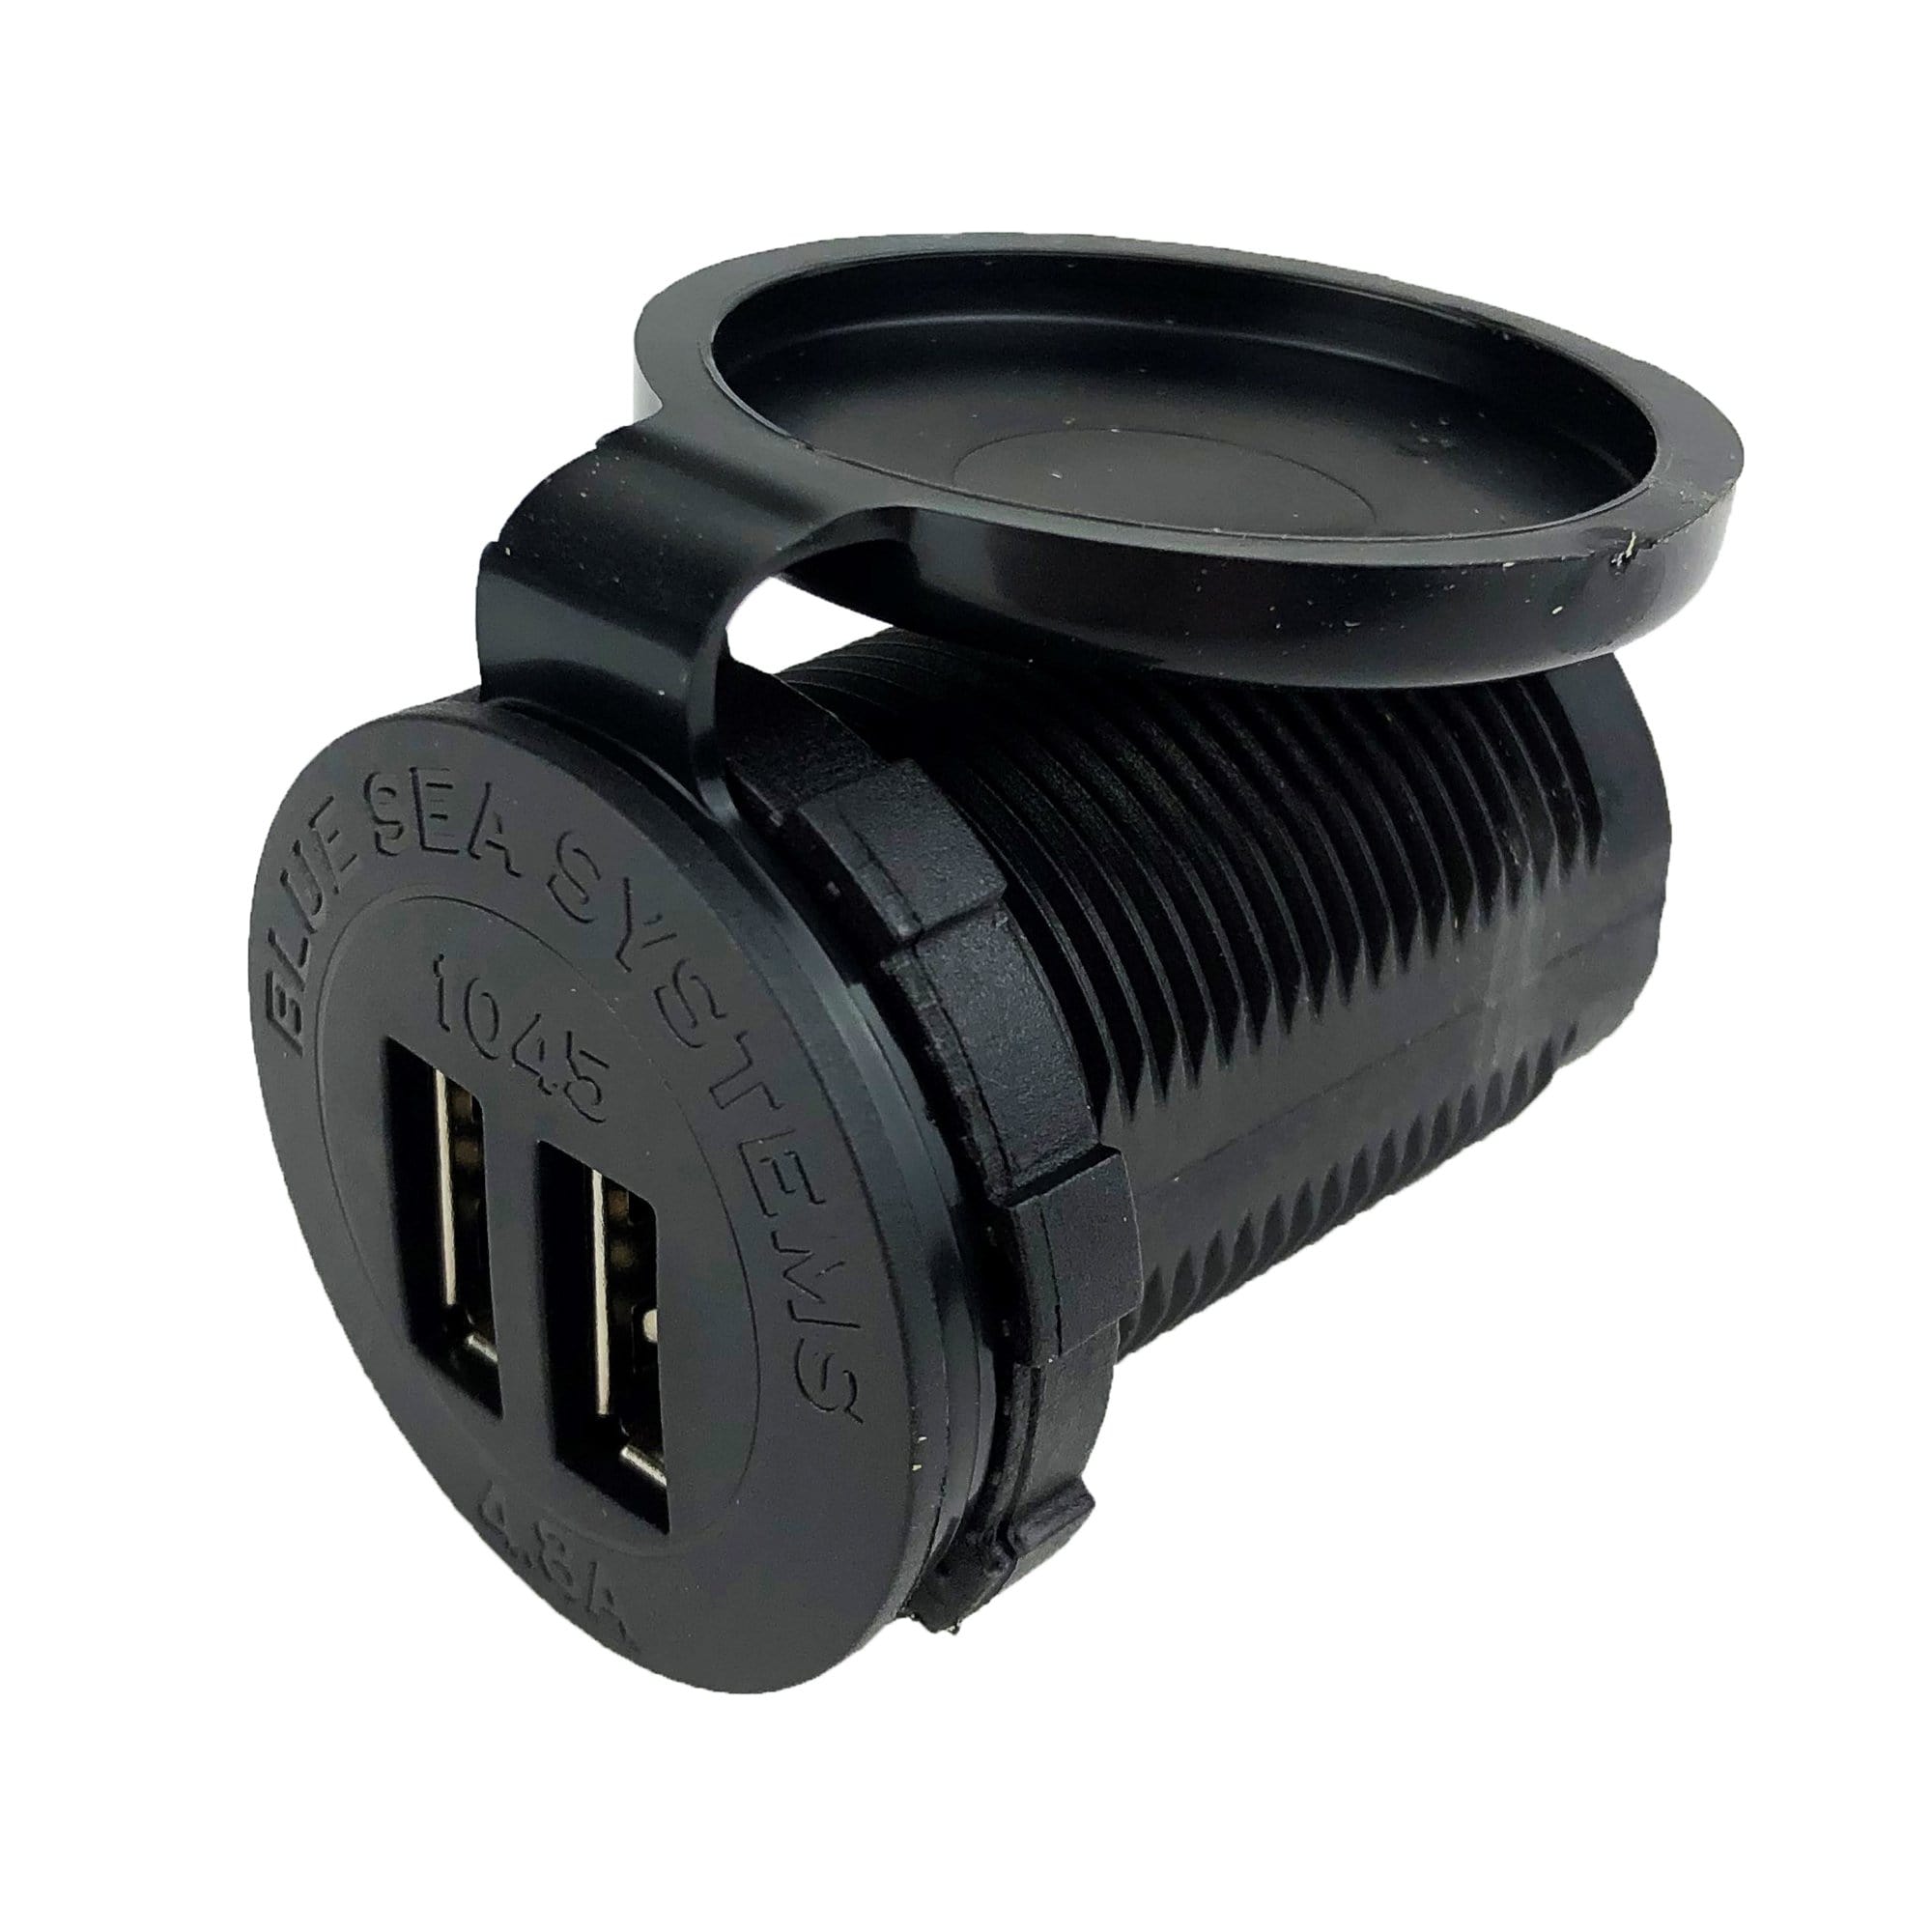 Blue Sea Systems 1045-BSS 12/24V DC Dual USB Charger W/ Intelligent Device Recognition, 4.8A